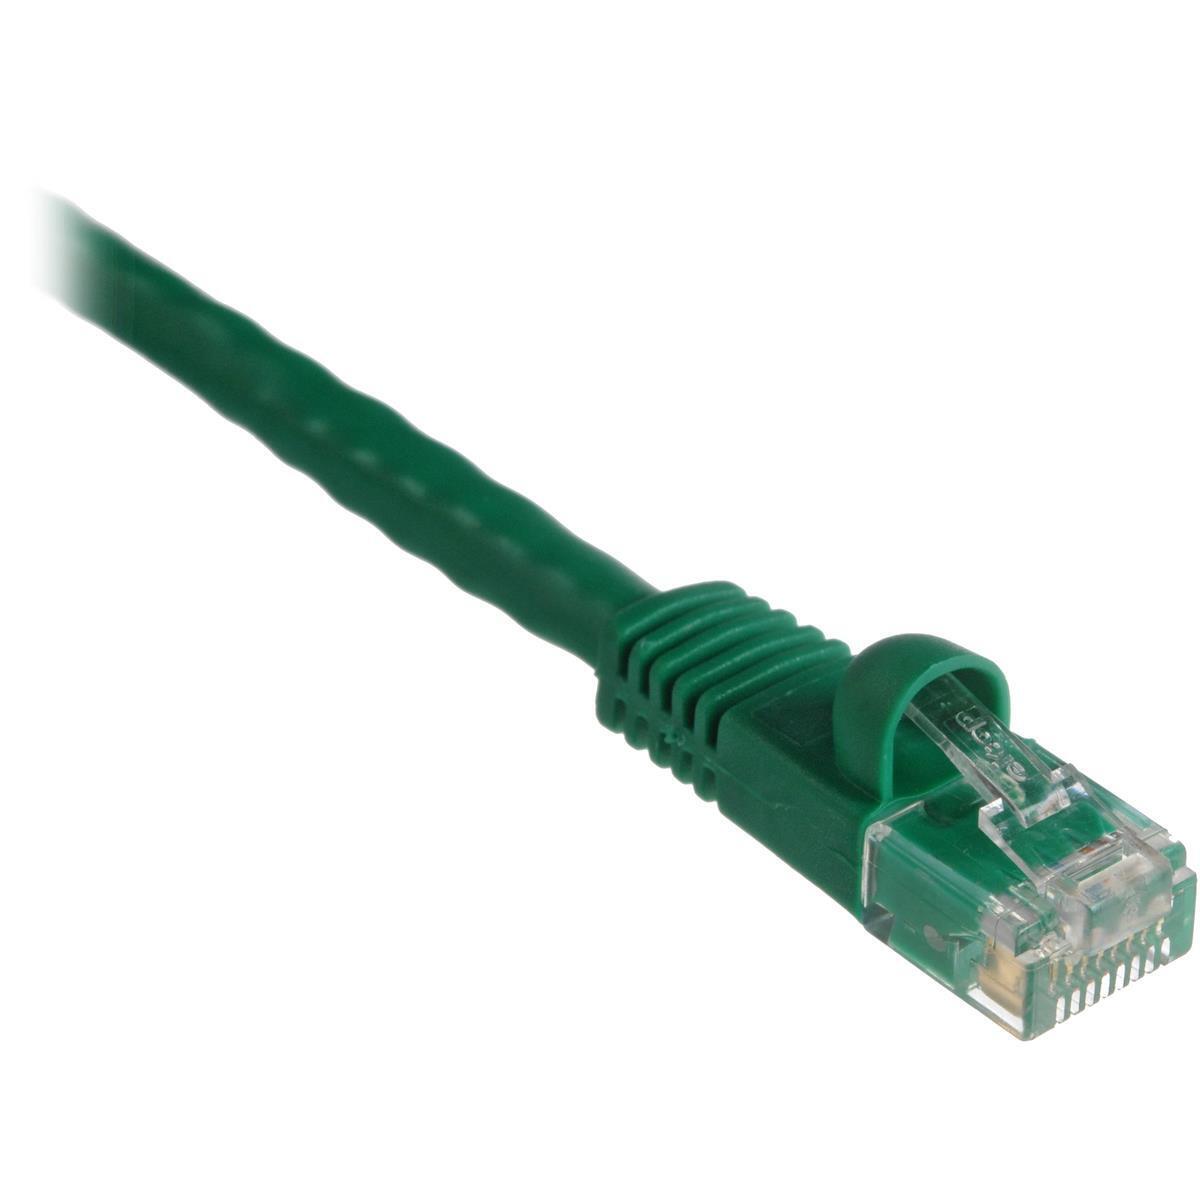 Comprehensive CAT5e 350 MHz Snagless Patch Cable, 1\', Green #CAT5-350-1GRN